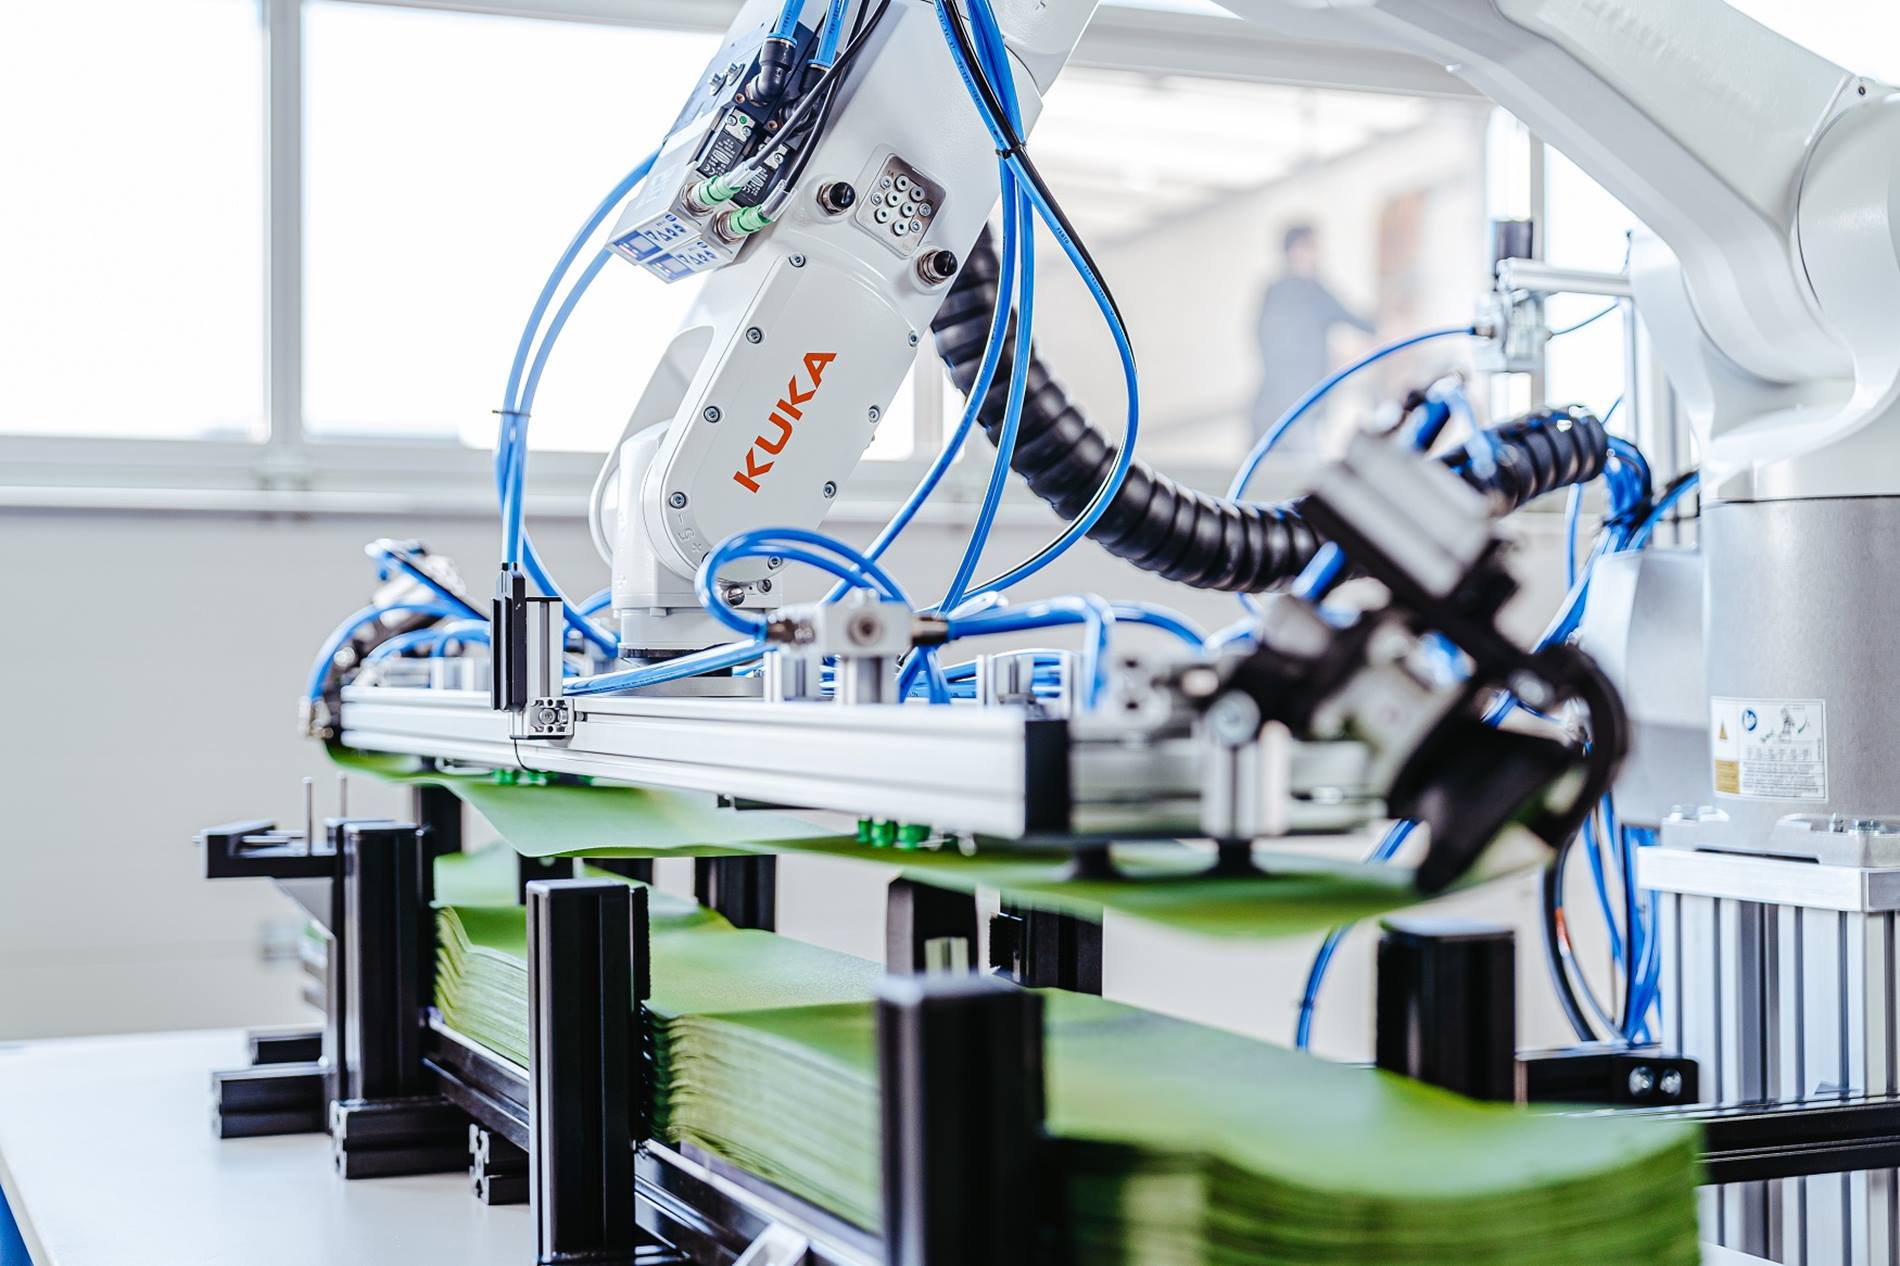 Small robotics from KUKA impress with compact design, high reach and precision - here in textile production.